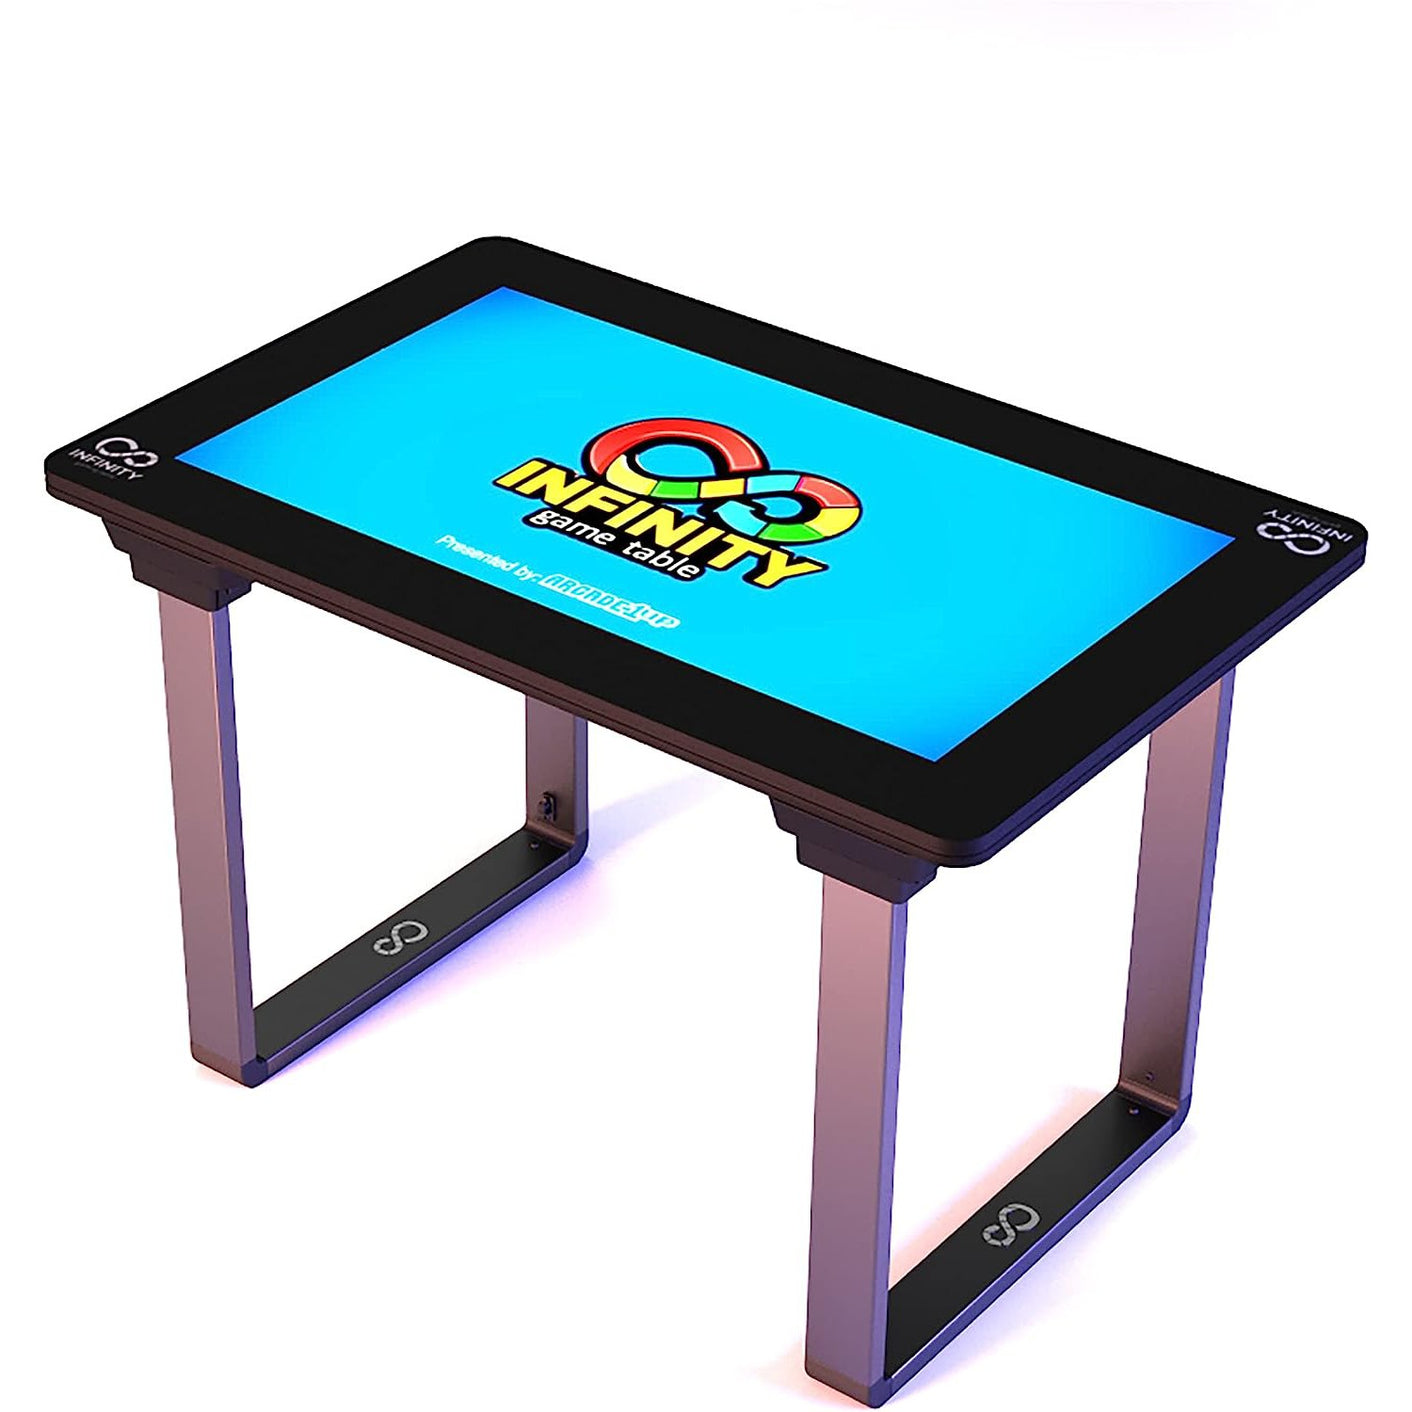 Arcade1Up Infinity Game Table - Black